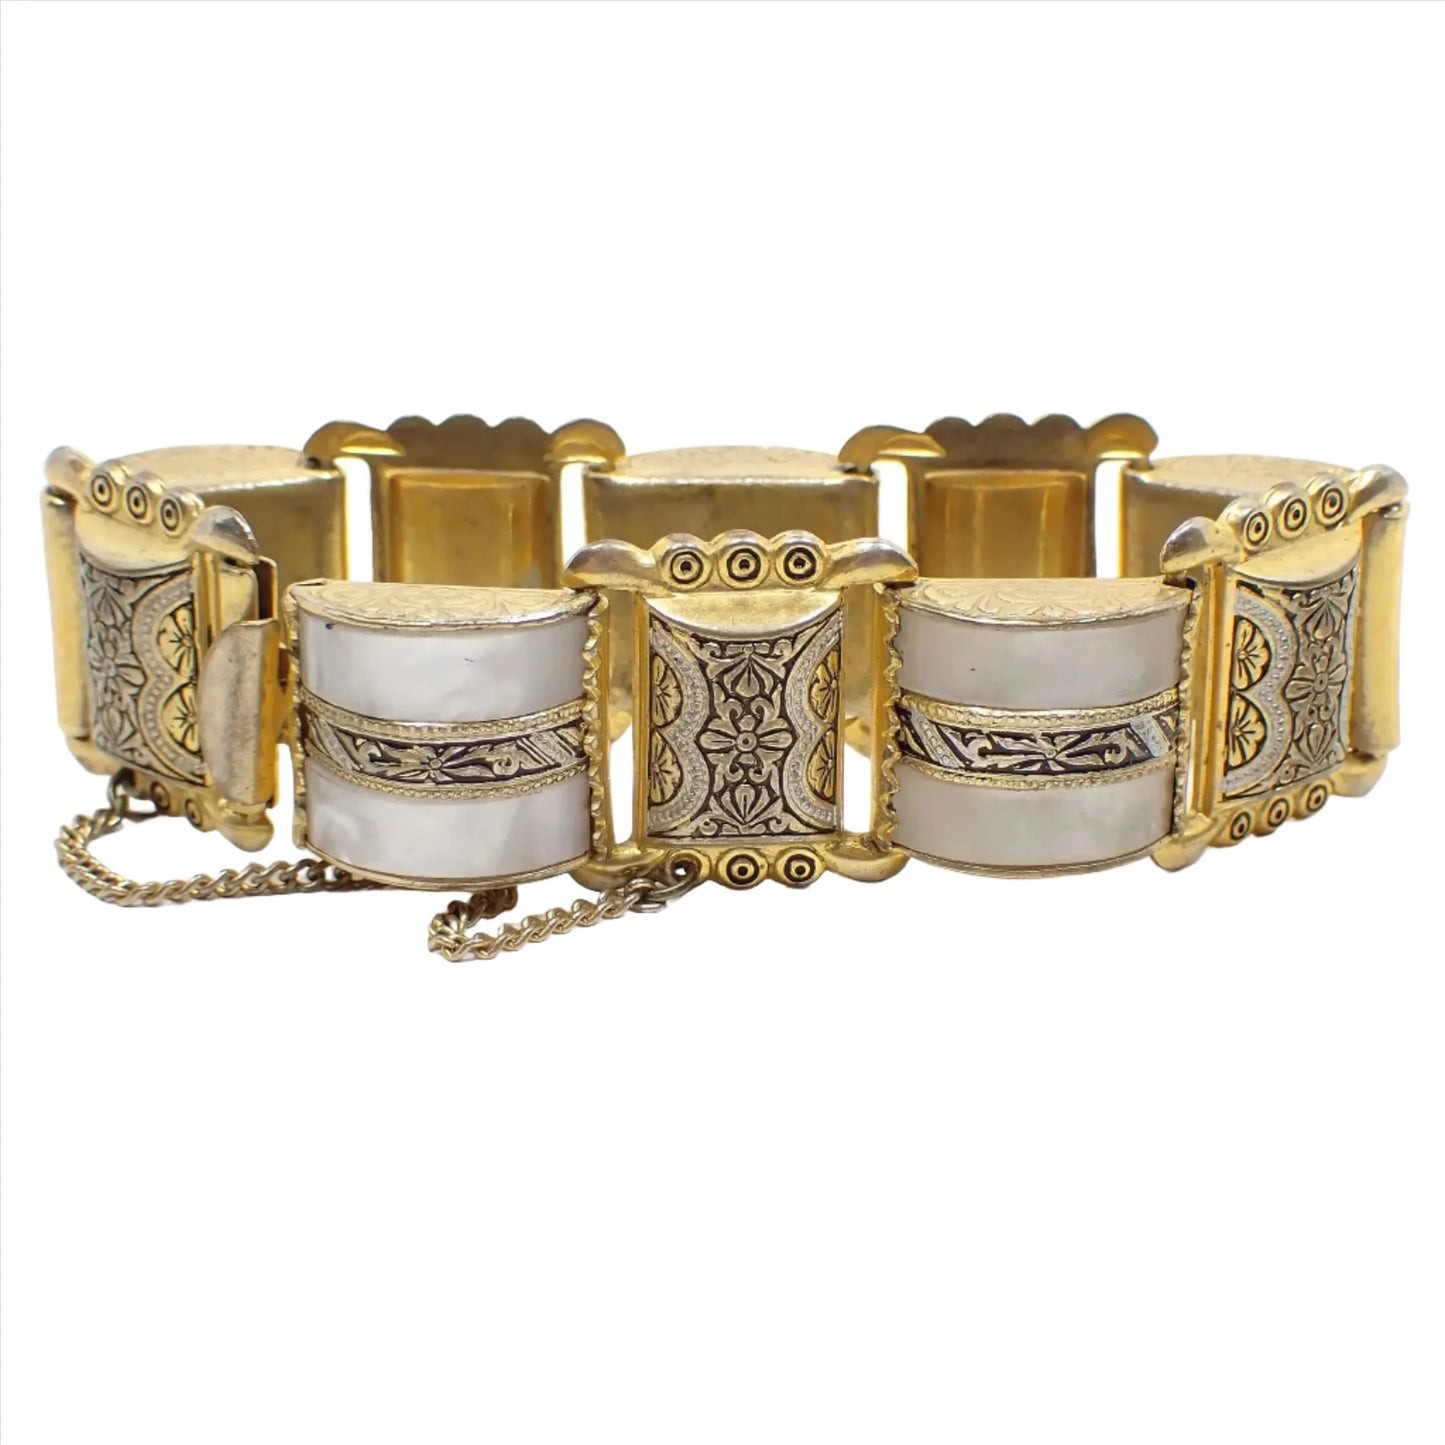 Enlarged view of the top of some of the links on the Mid Century vintage Damascene and lucite link bracelet. There are metal links with black and silver painted accents on the gold tone metal and in between them are domed links with pearly white lucite and painted metal strips in the middle. There is a safety chain and box clasp showing in the photo.